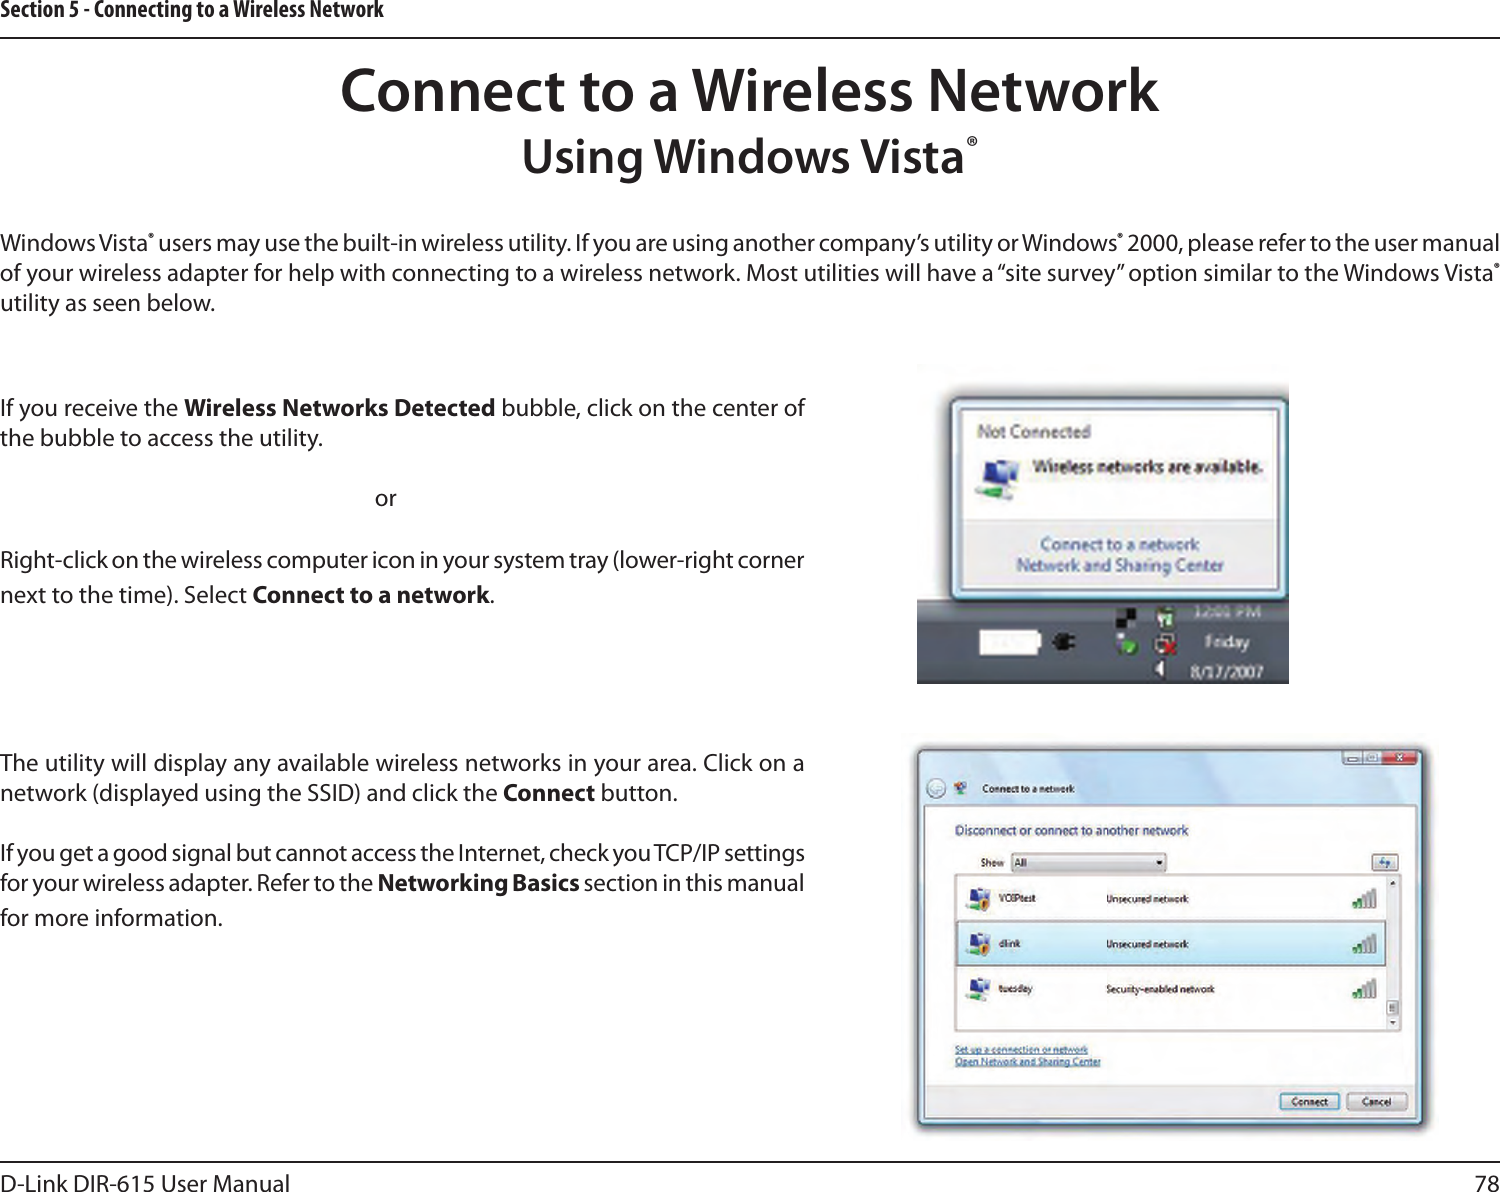 78D-Link DIR-615 User ManualSection 5 - Connecting to a Wireless NetworkConnect to a Wireless NetworkWindows Vista® users may use the built-in wireless utility. If you are using another company’s utility or Windows® 2000, please refer to the user manual of your wireless adapter for help with connecting to a wireless network. Most utilities will have a “site survey” option similar to the Windows Vista® utility as seen below.Right-click on the wireless computer icon in your system tray (lower-right corner next to the time). Select Connect to a network.If you receive the Wireless Networks Detected bubble, click on the center of the bubble to access the utility.     orThe utility will display any available wireless networks in your area. Click on a network (displayed using the SSID) and click the Connect button.If you get a good signal but cannot access the Internet, check you TCP/IP settings for your wireless adapter. Refer to the Networking Basics section in this manual for more information.Using Windows Vista®